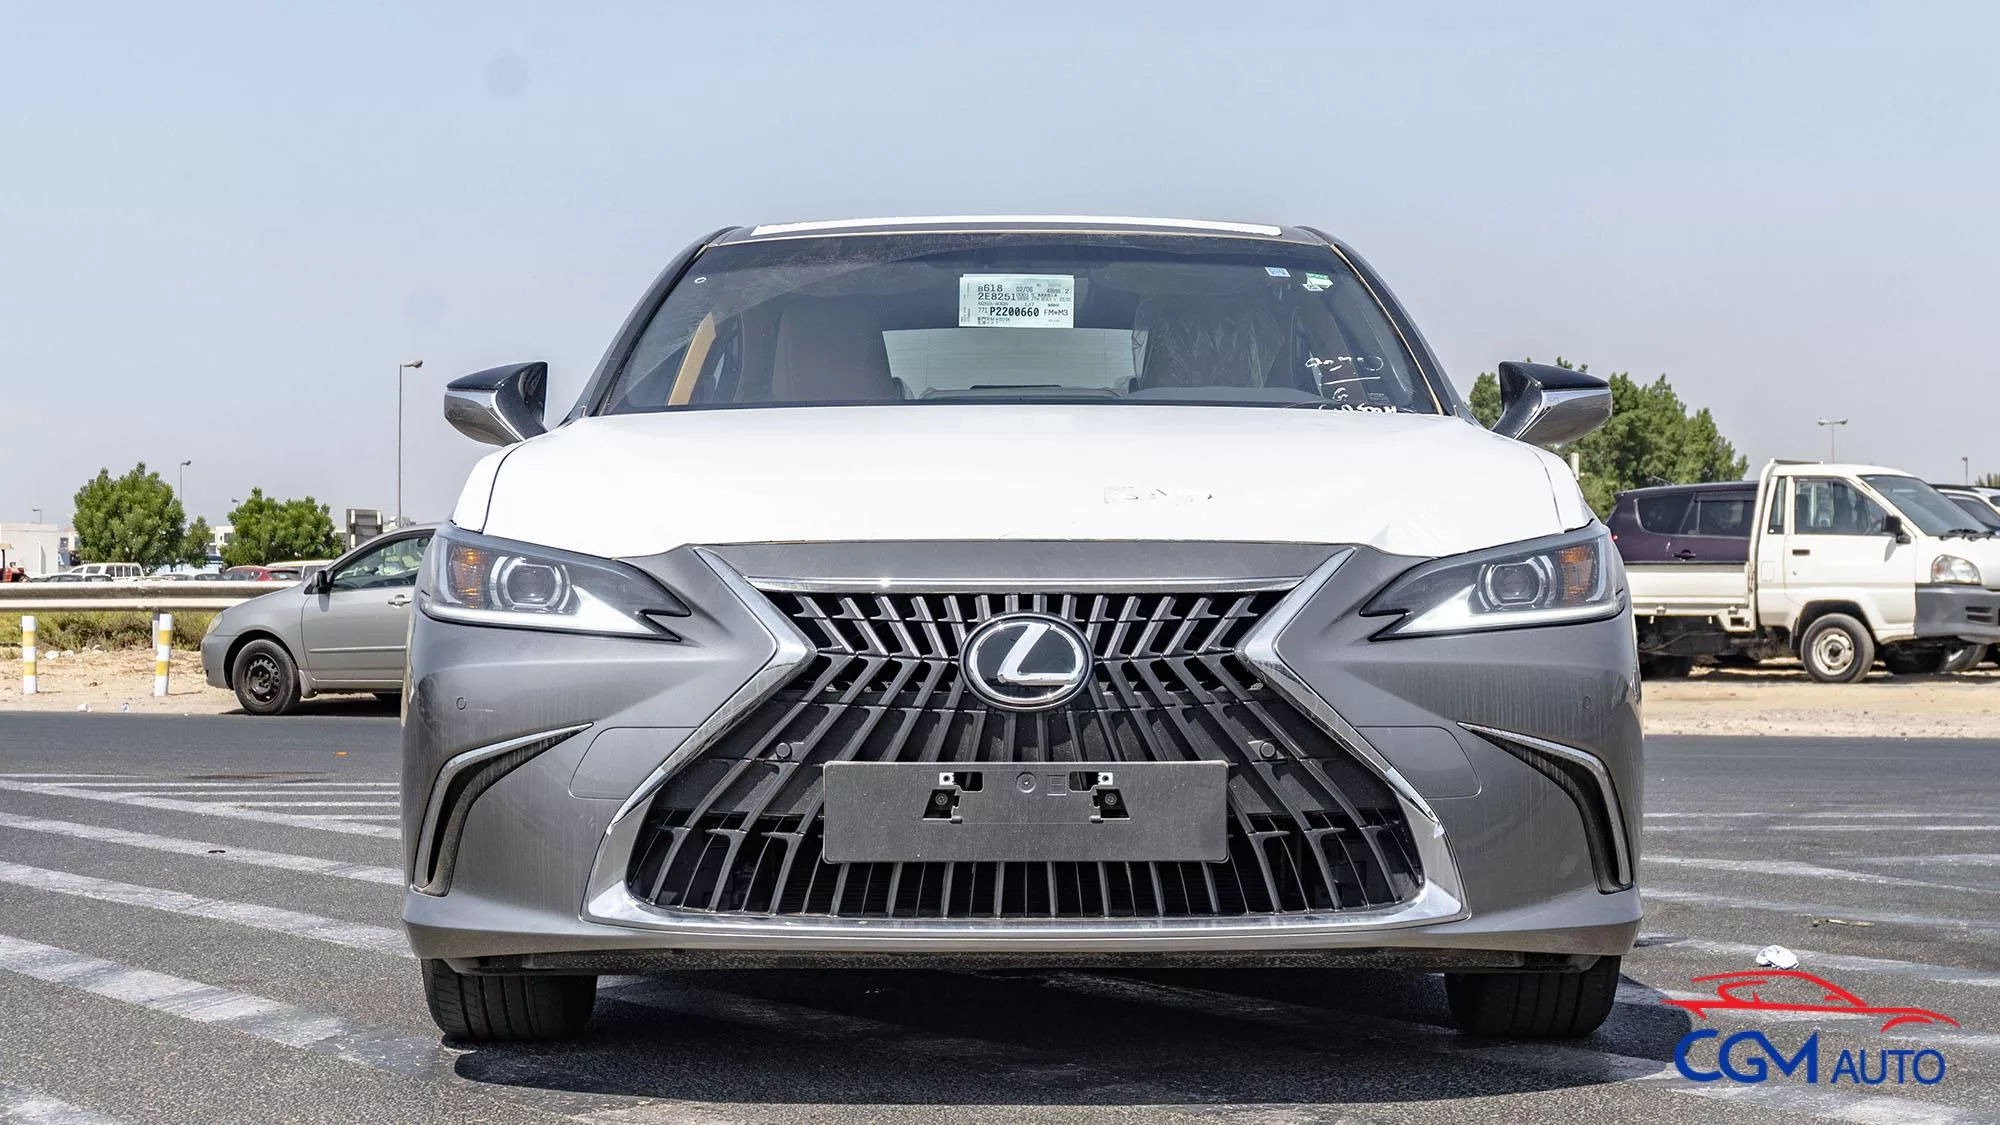 Lexus ES300H new cars selling 2023 2024 | Explore Exciting New Car Deals for Sale in UAE, Dubai, Sharjah, and Abu Dhabi | Offers